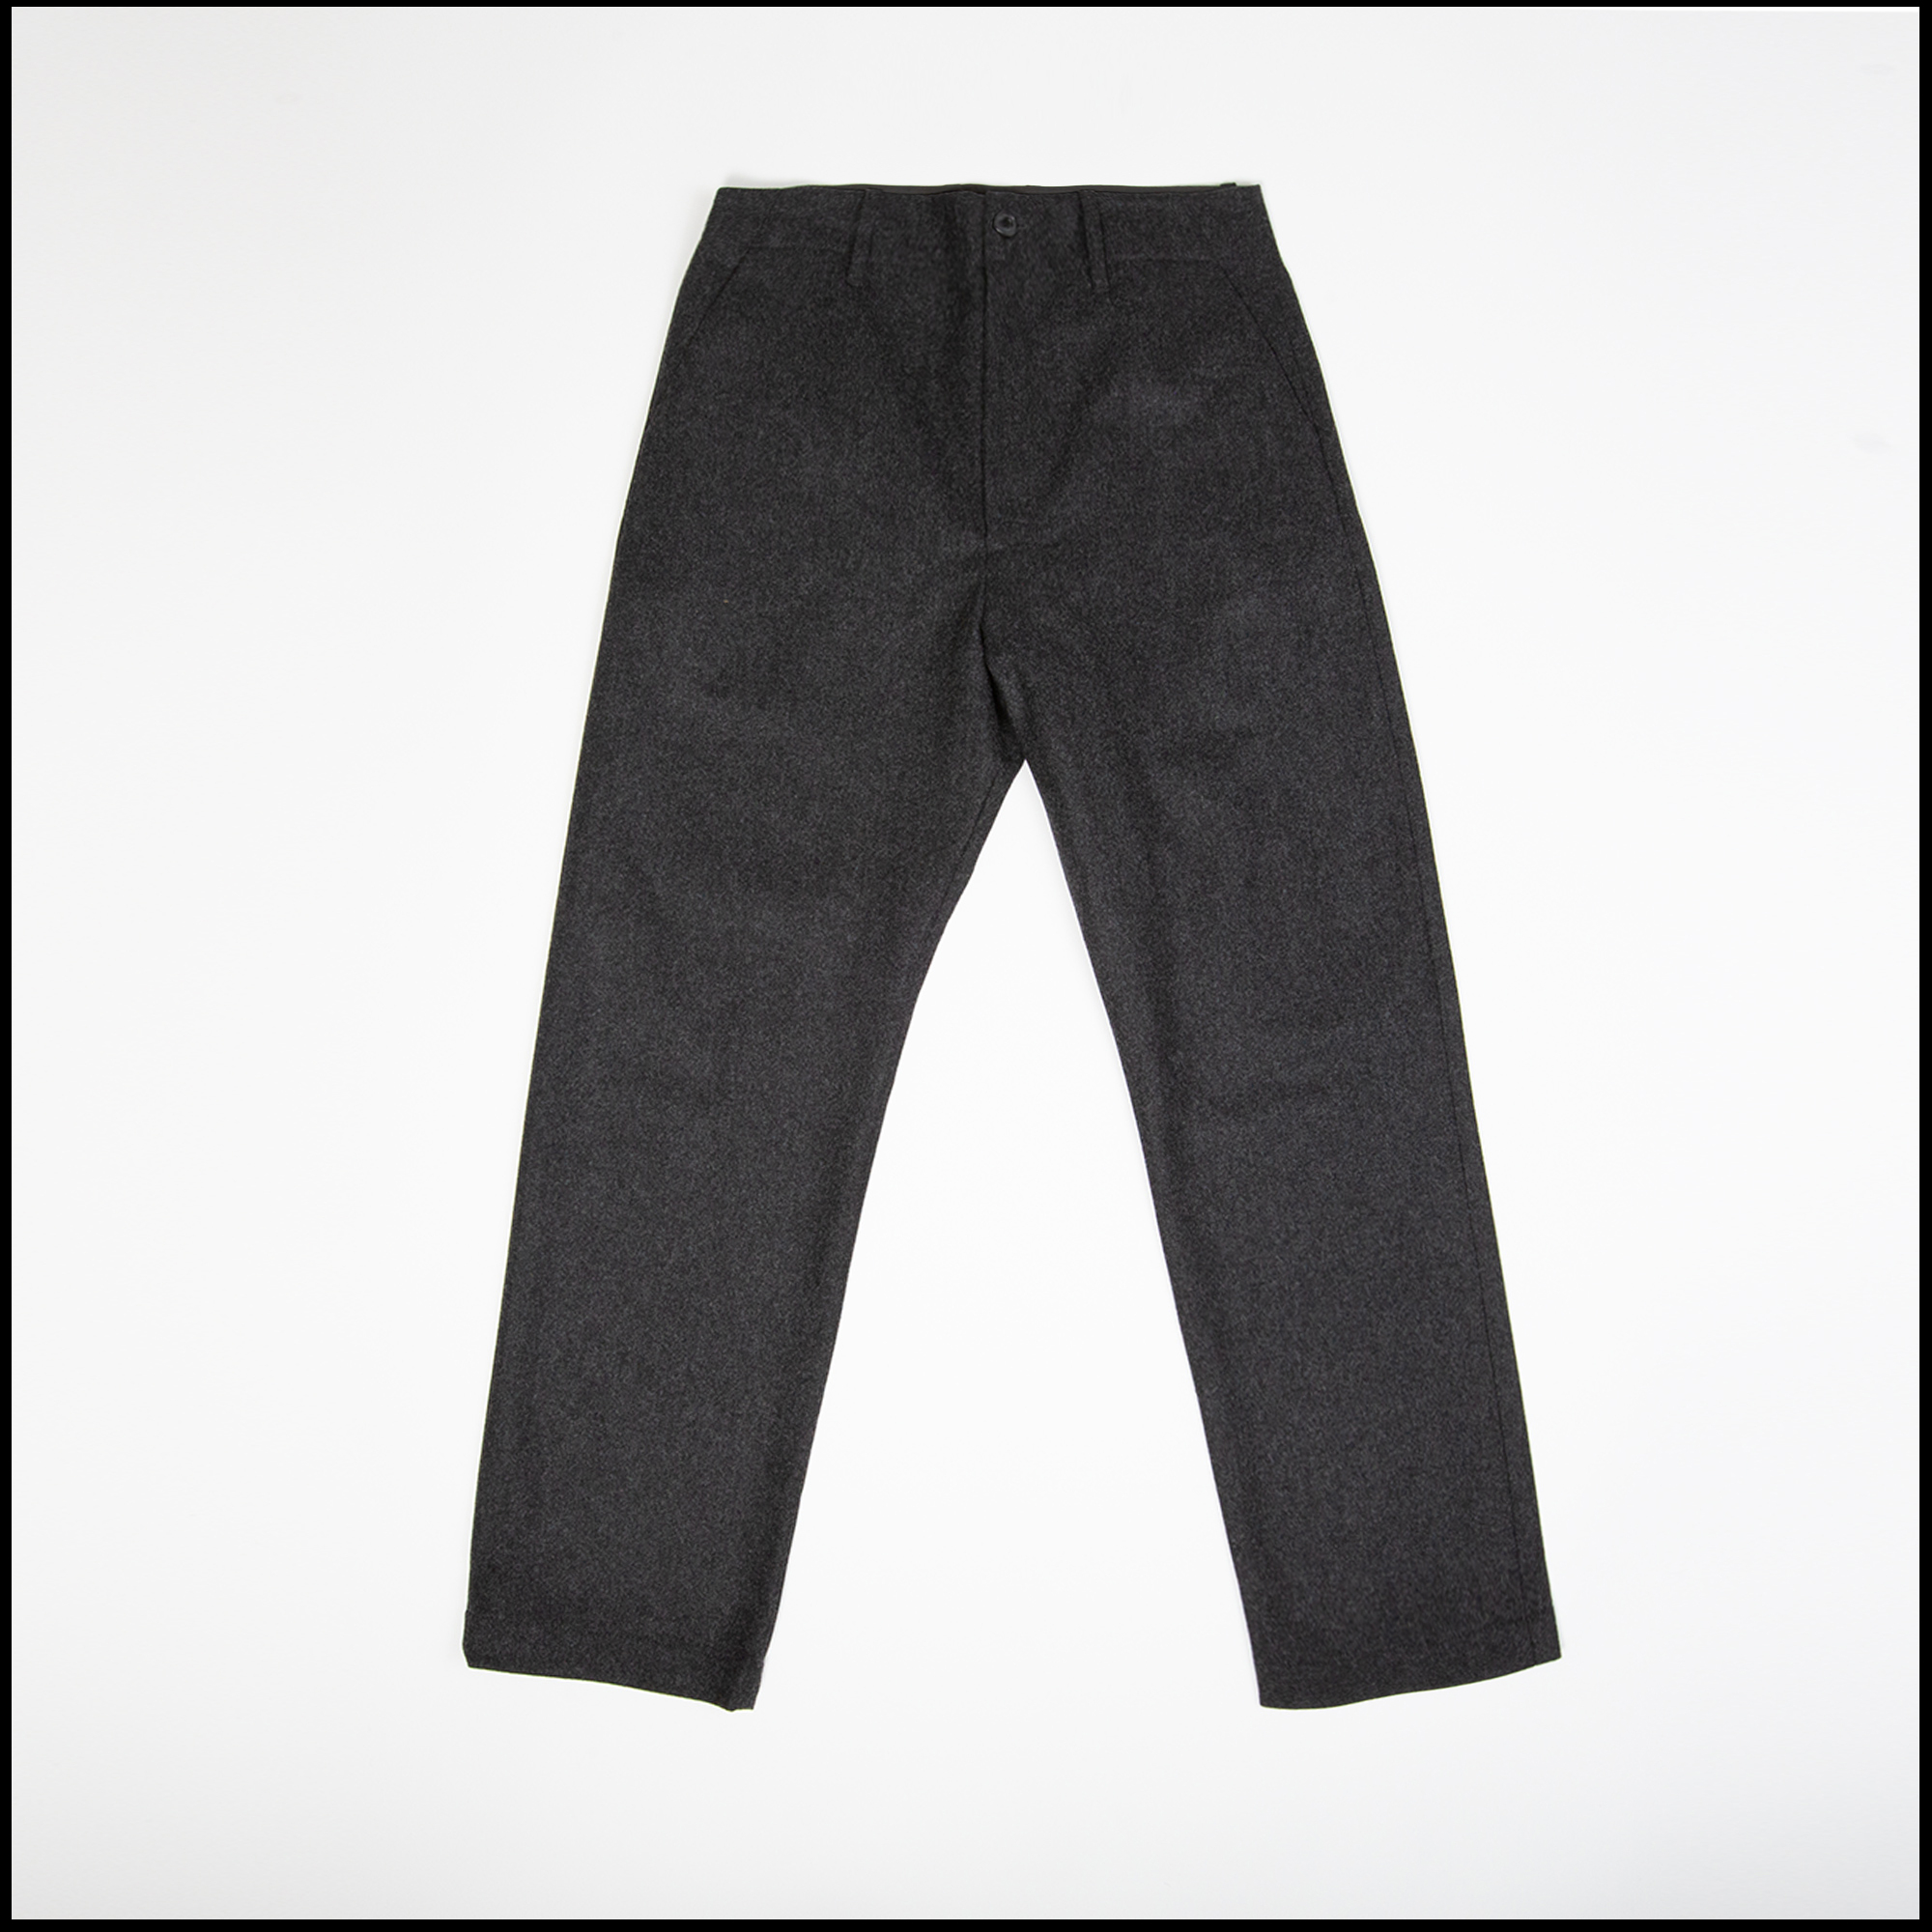 FOX Pants in Charcoal color by Arpenteur